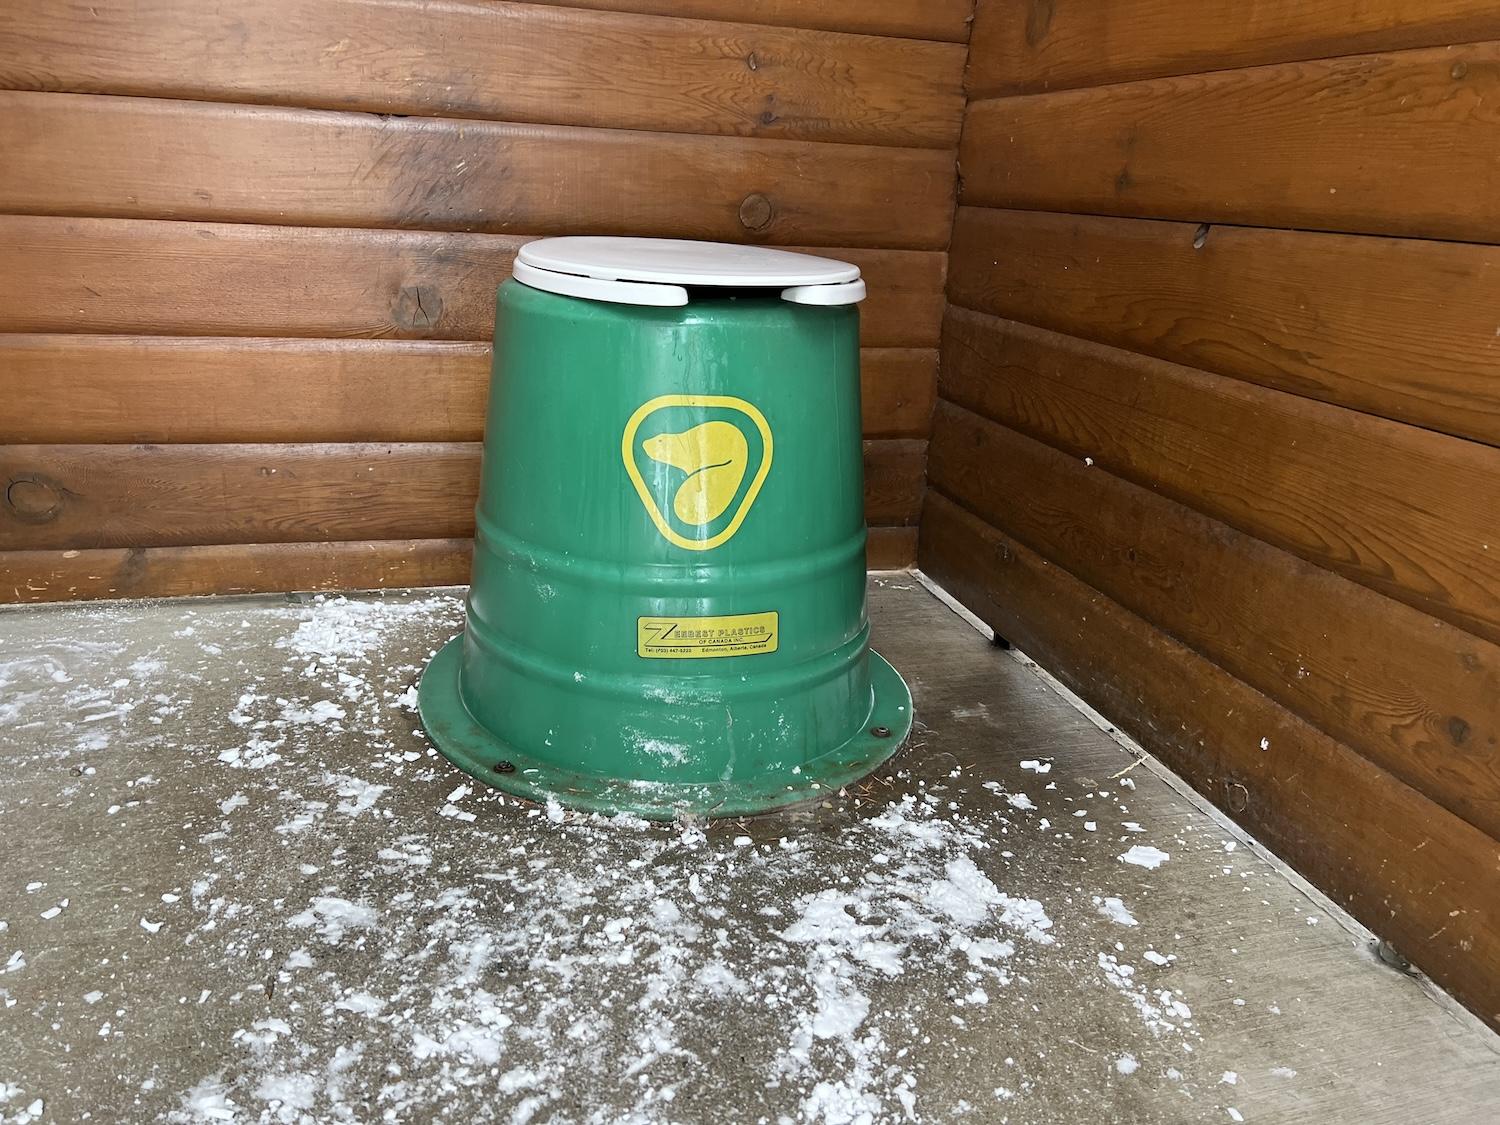 It's hard to find Parks Canada-branded outhouse toilets, like this one in Jasper National Park.